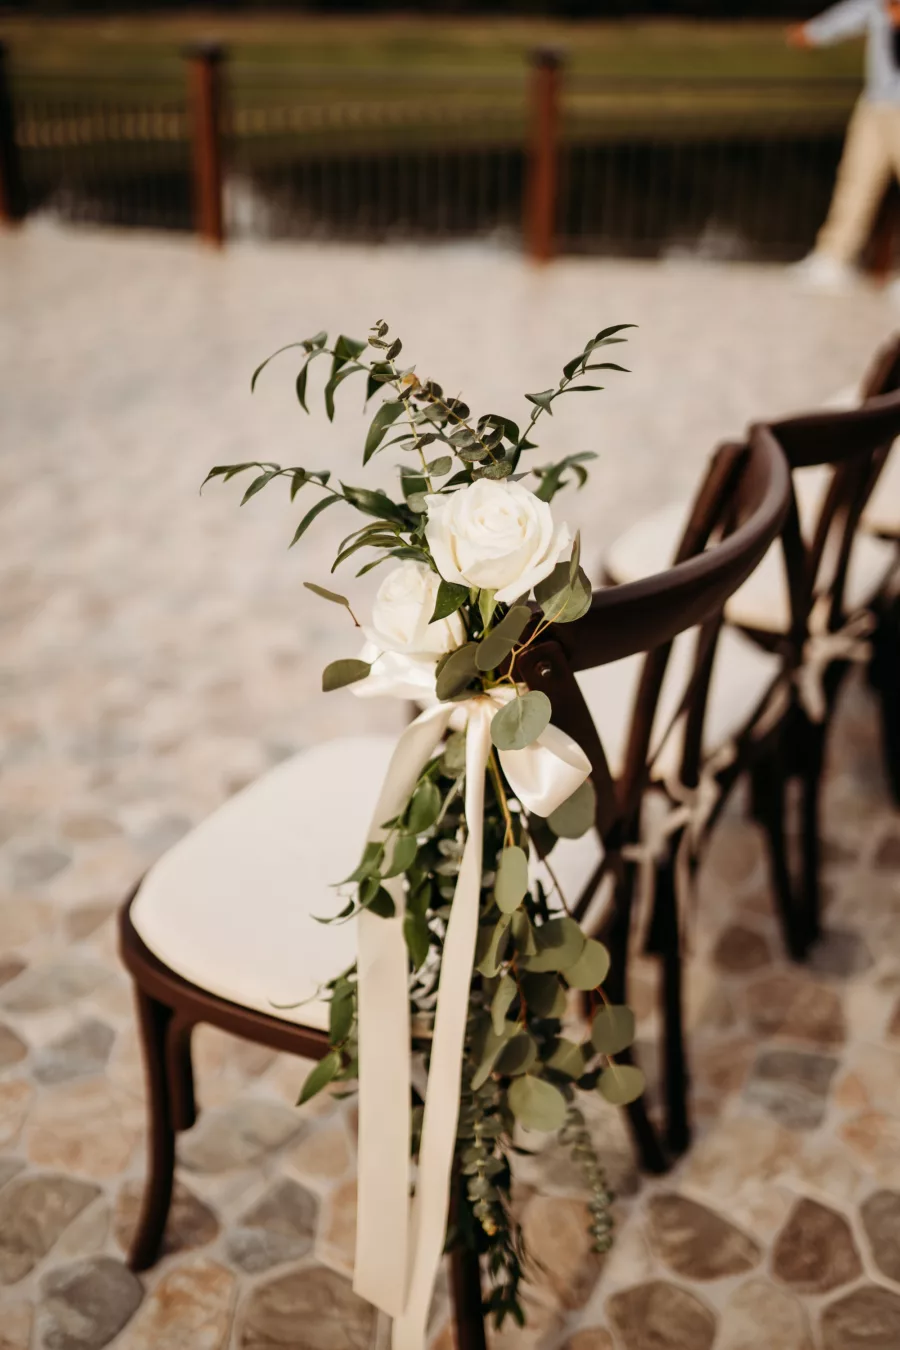 Southern Wedding Ceremony Aisle Chair Flower Arrangement Decor Ideas | White Roses, Greenery, and Ribbon